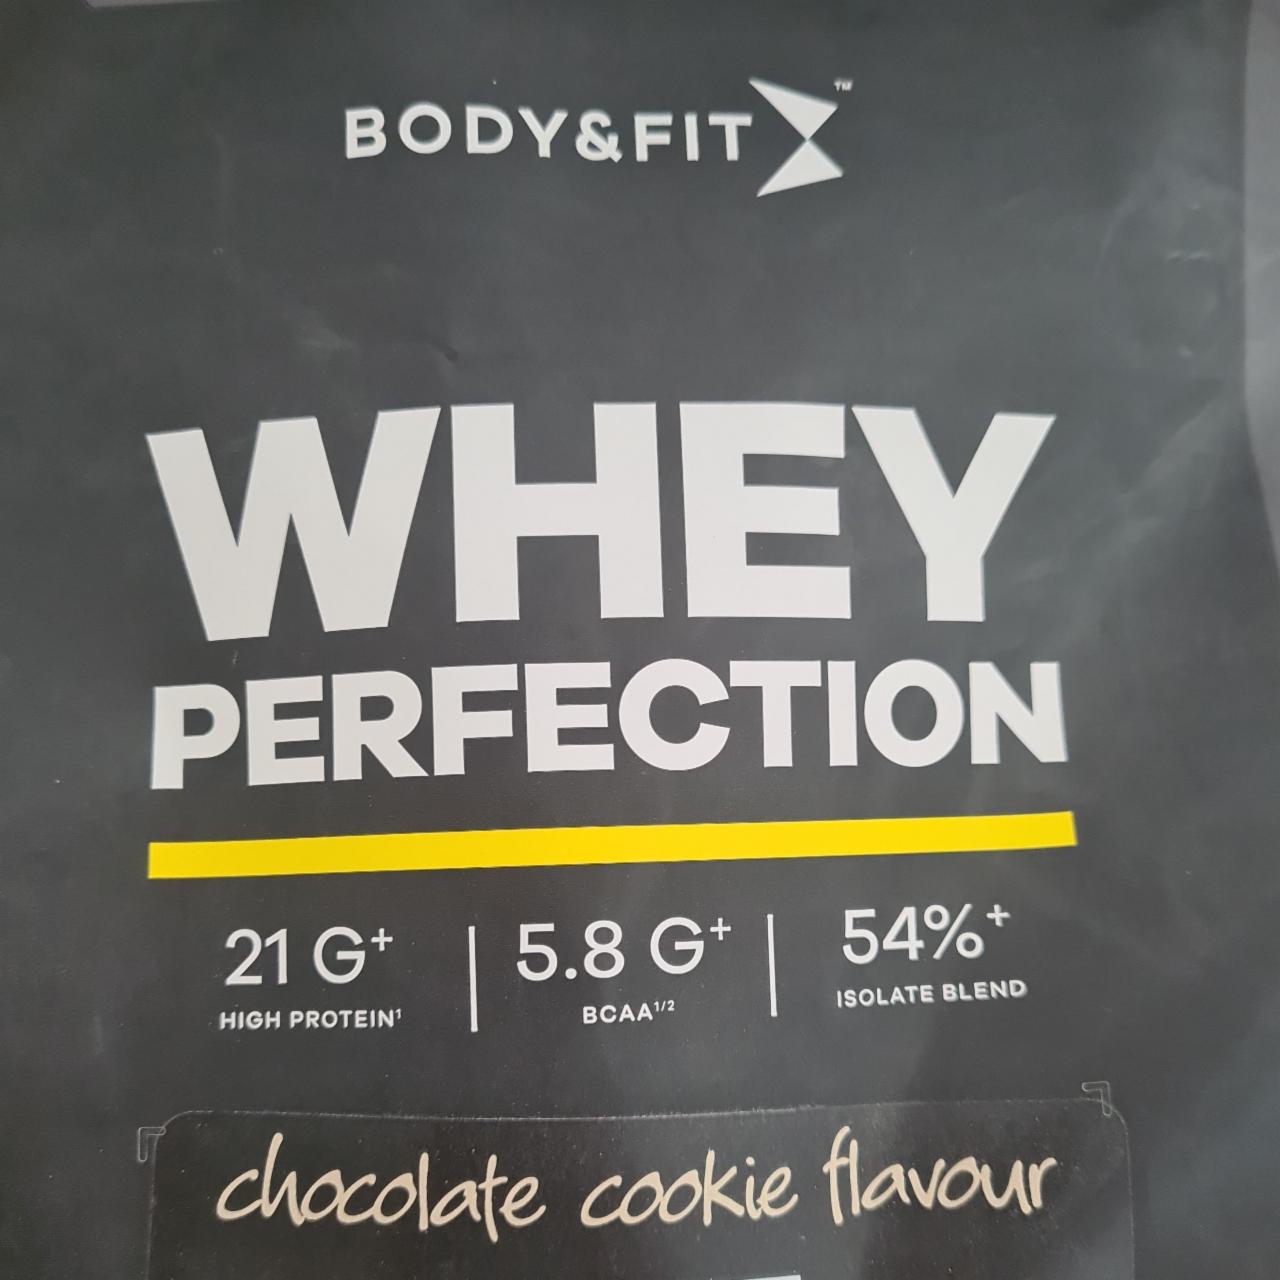 Fotografie - Whey perfection protein powder chocolate cookie flavour Body&Fit